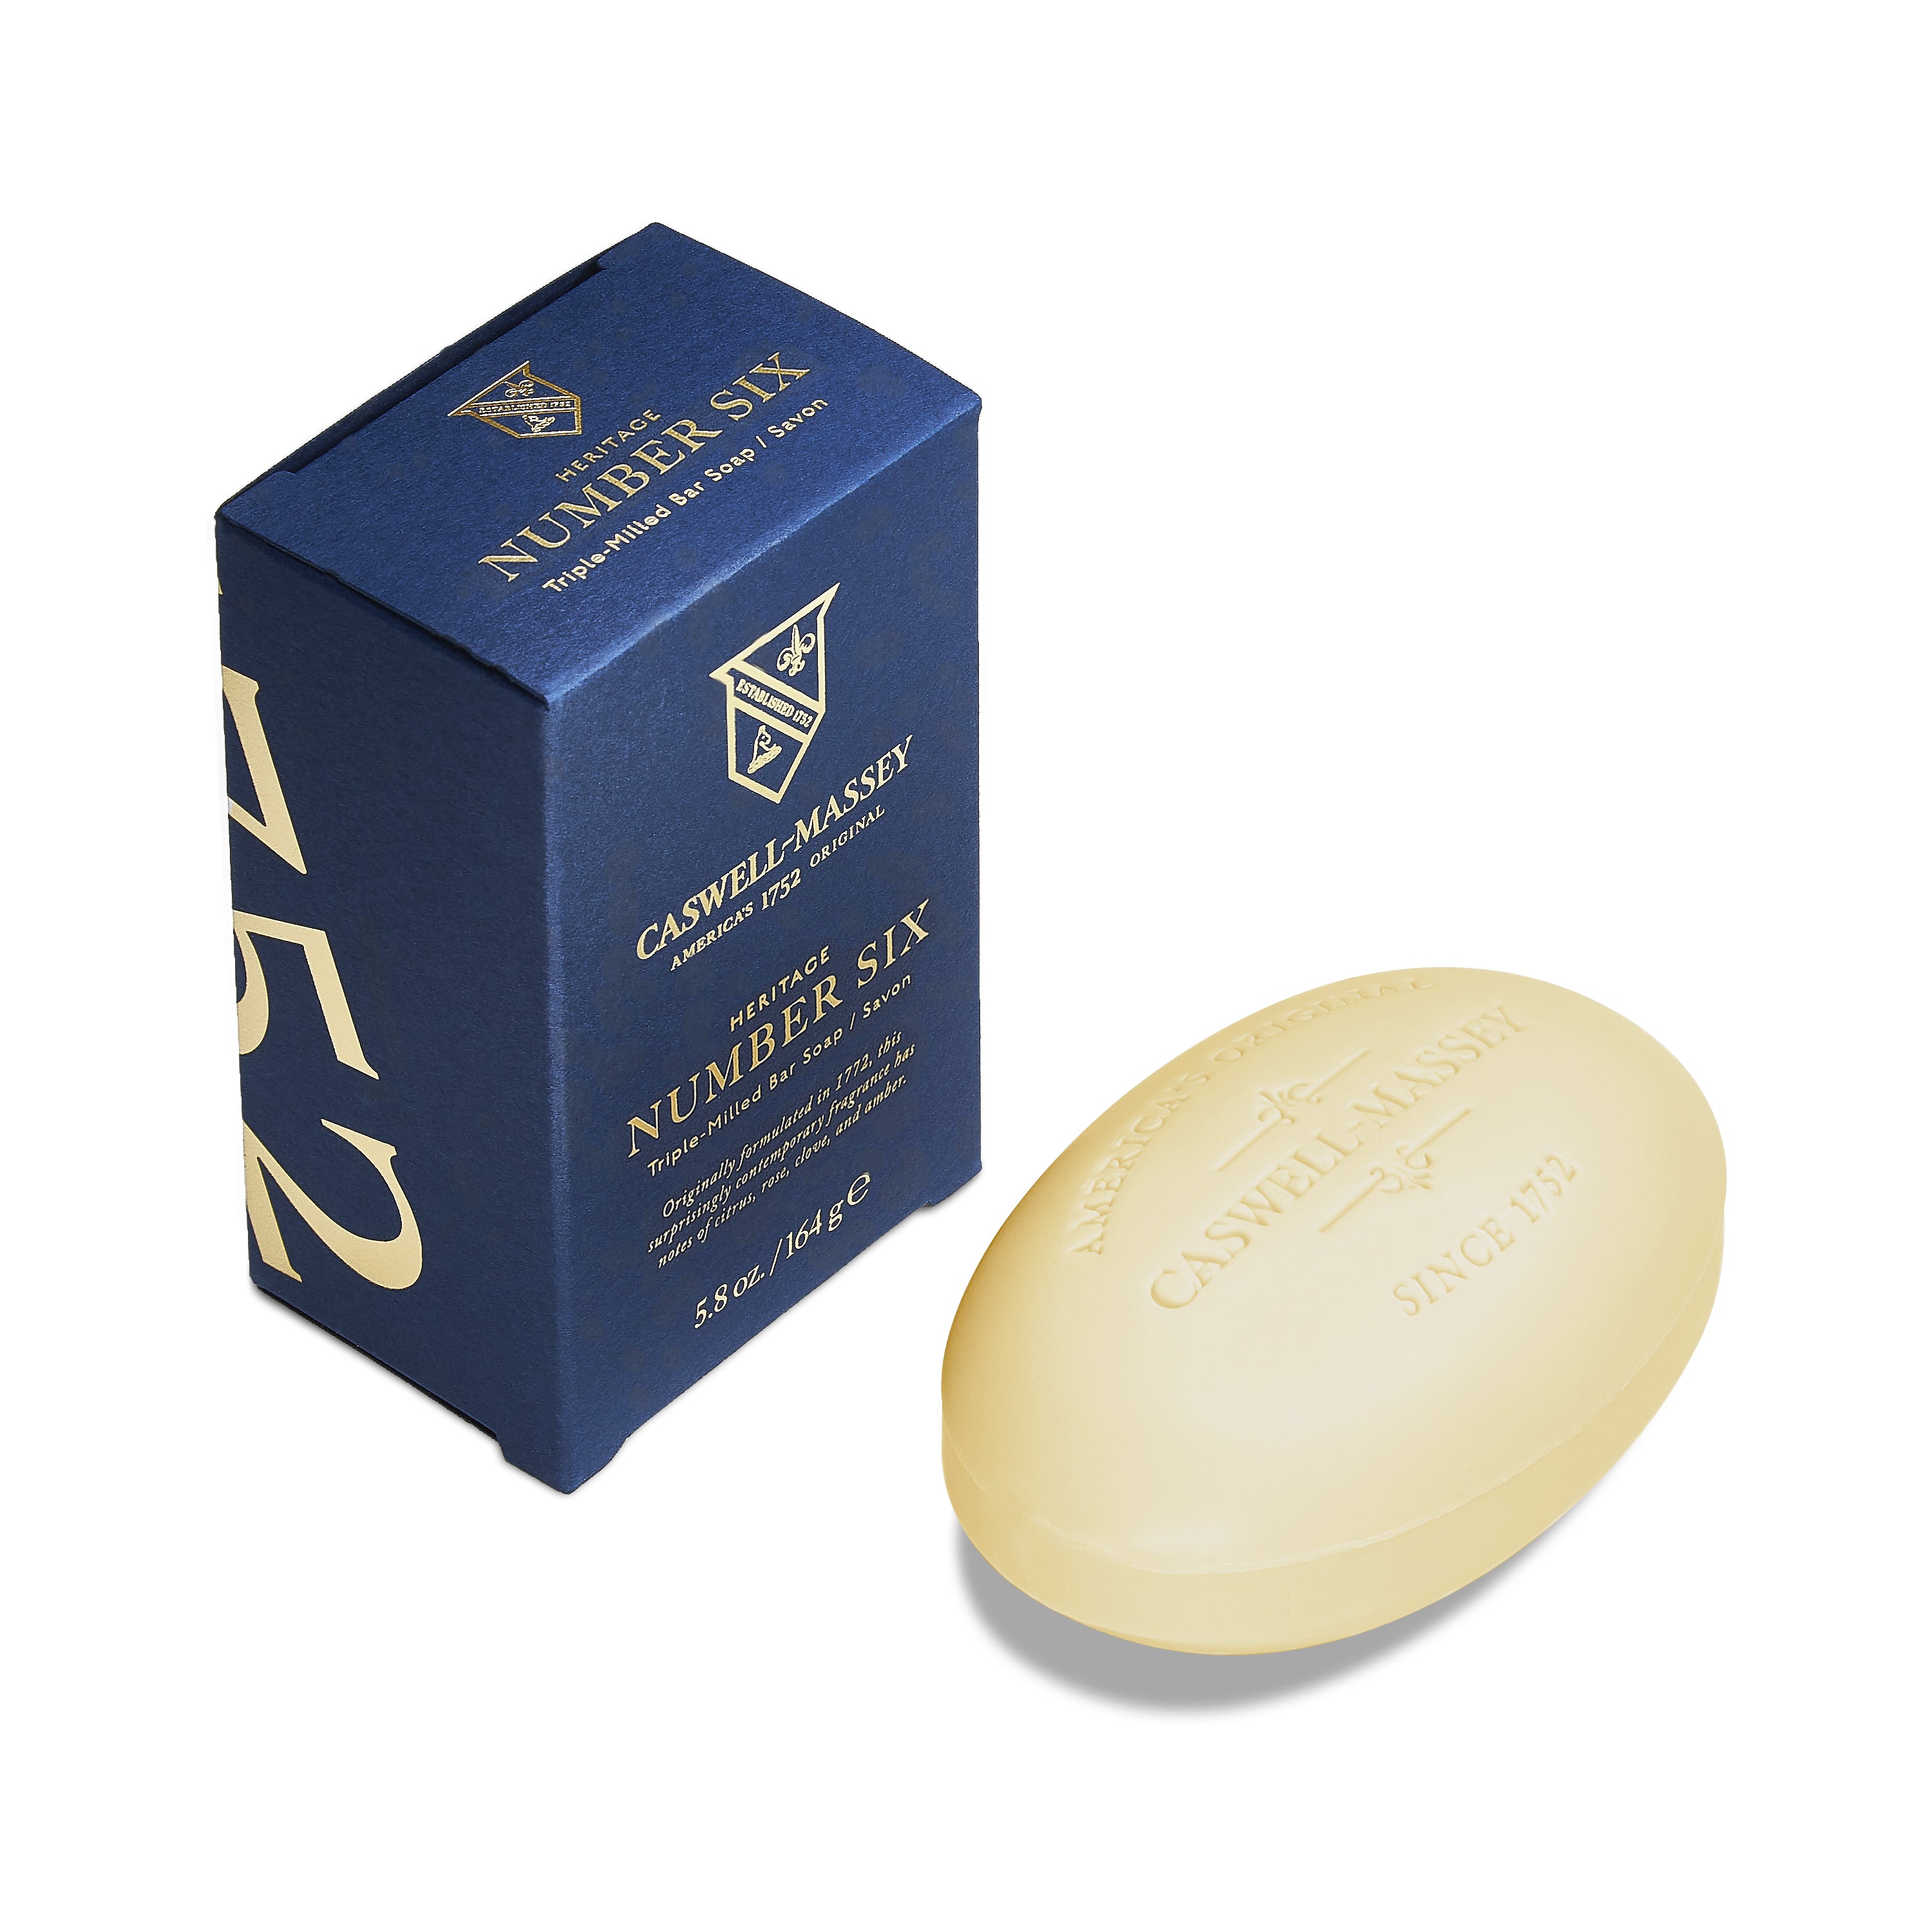 Caswell-Massey® Heritage Number Six Bar Soap shown with navy blue outer box